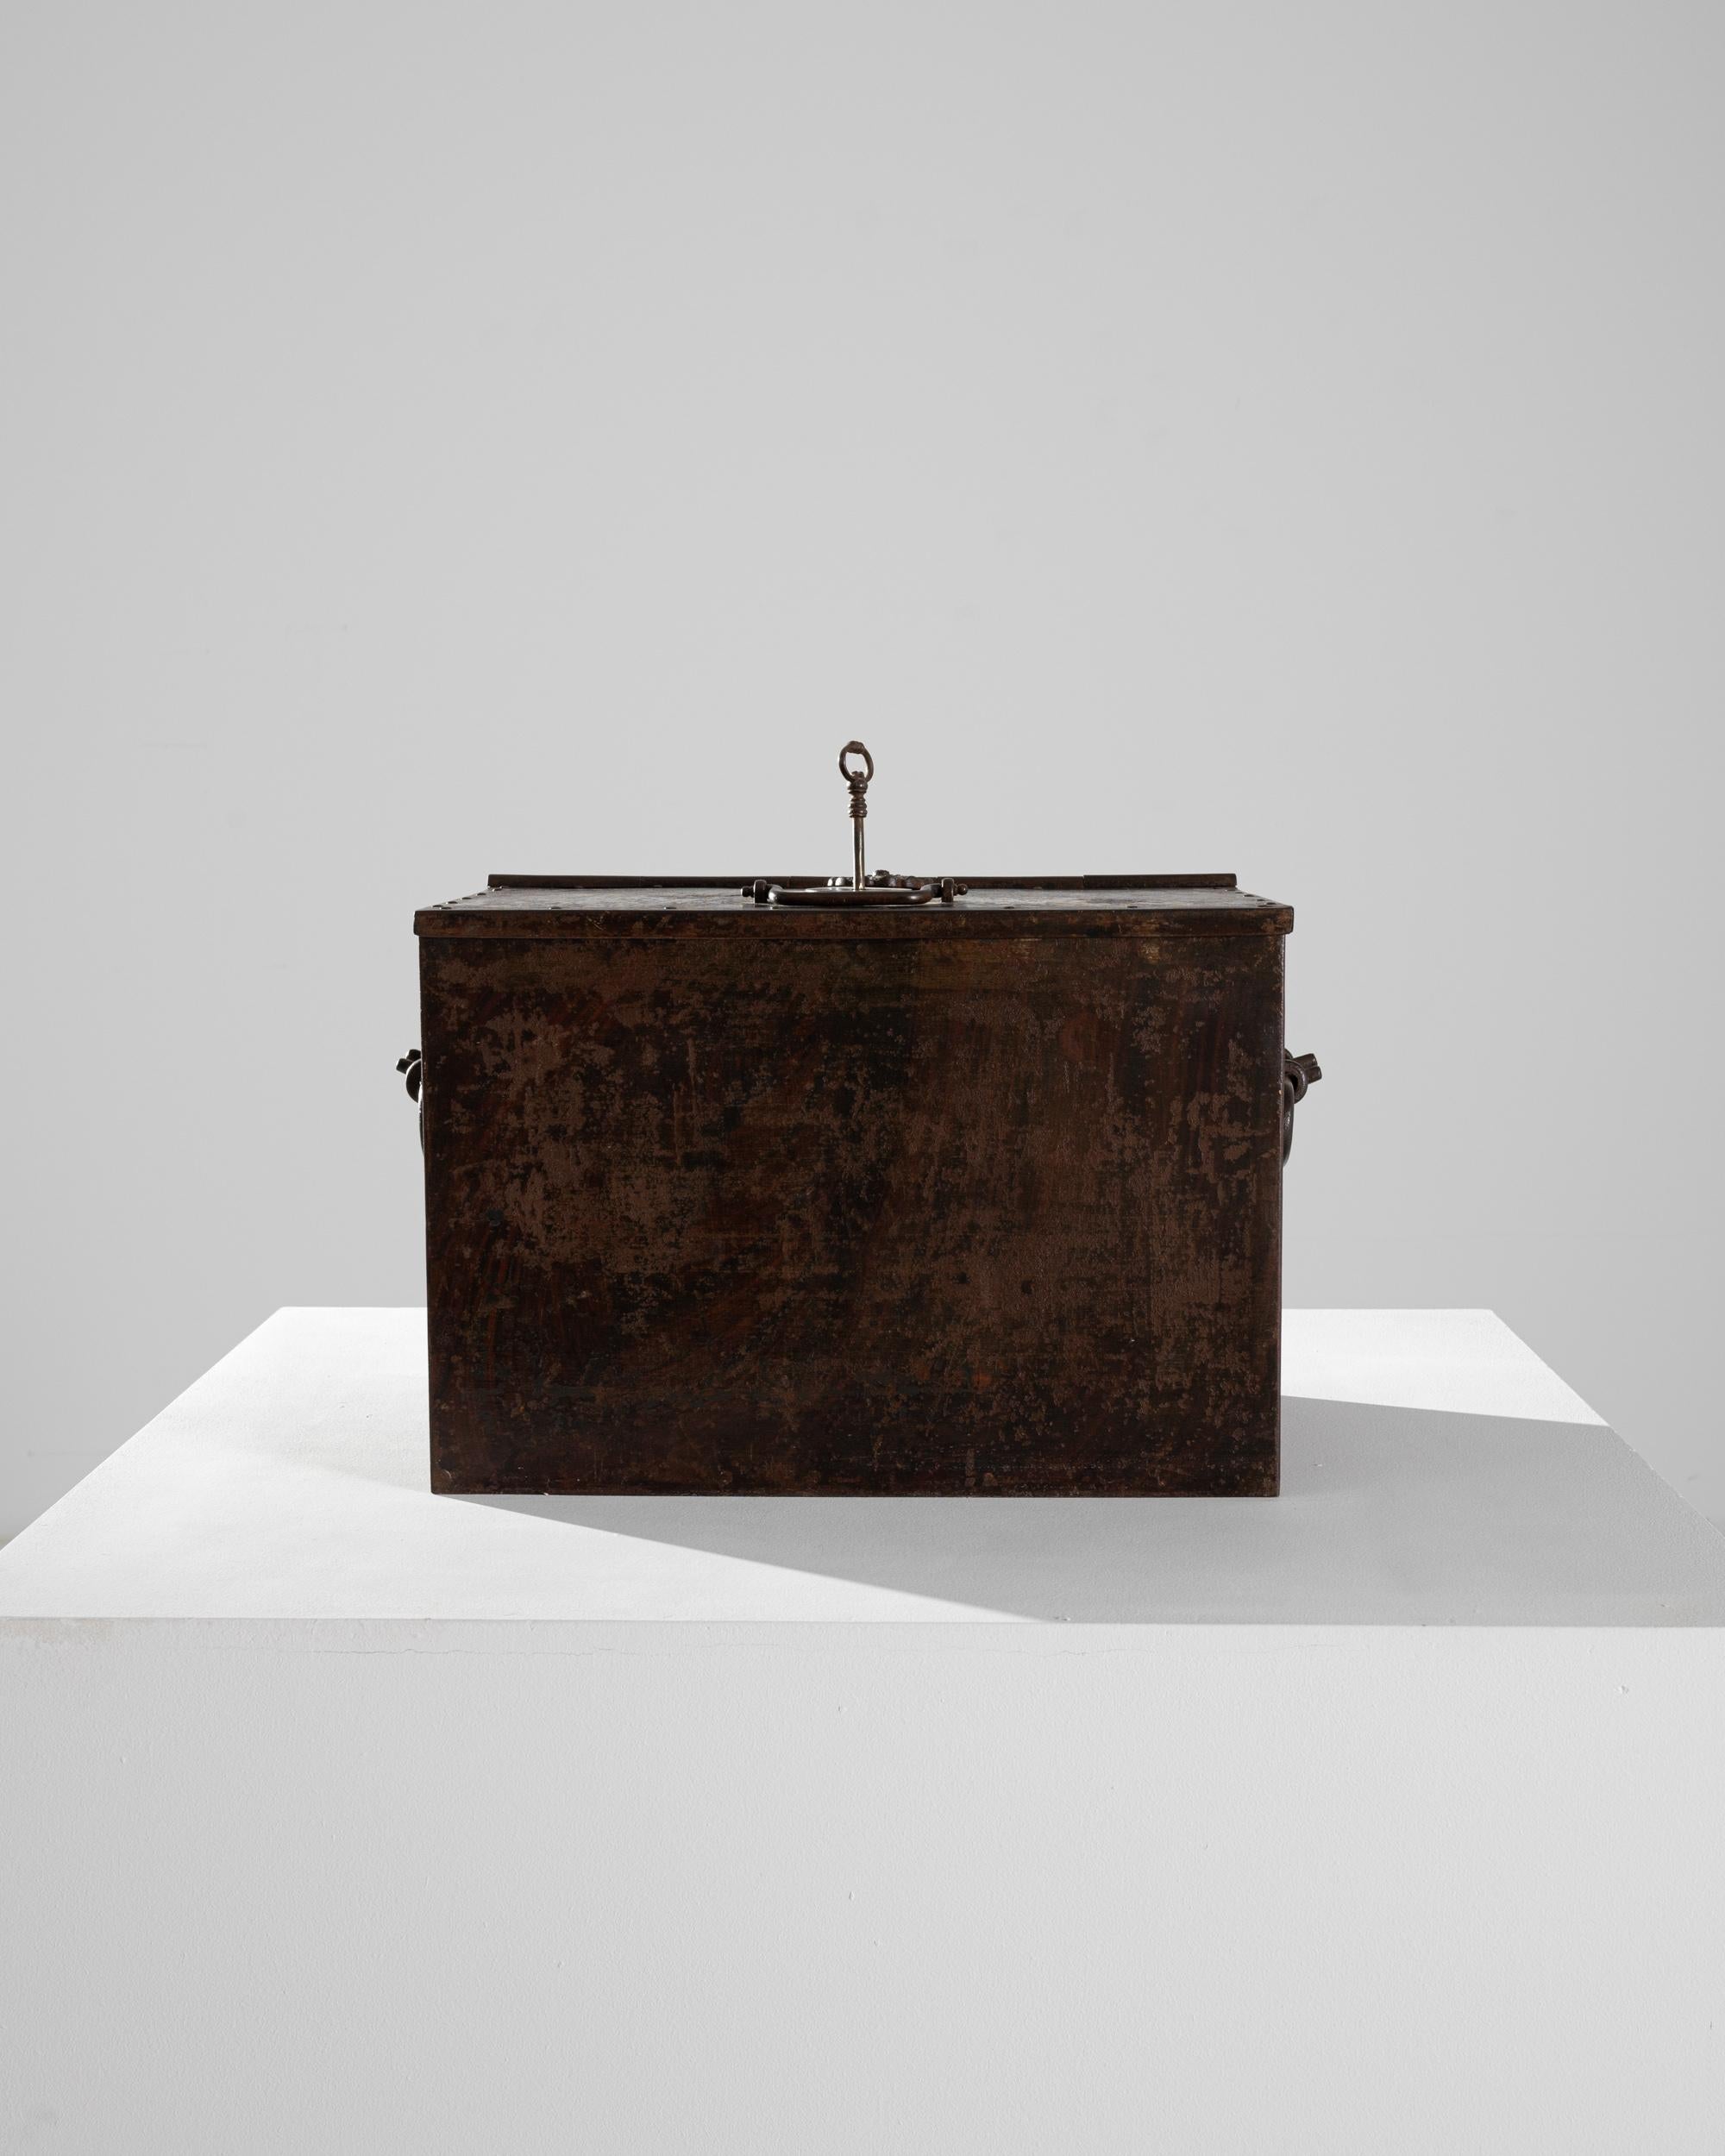 Originally used as a safe or strong-box, this antique iron trunk remains a trustworthy vault for treasured possessions. Made in 19th century France, the surface of the metal has aged to a dark, velvety patina, giving the trunk an air of mystery. An